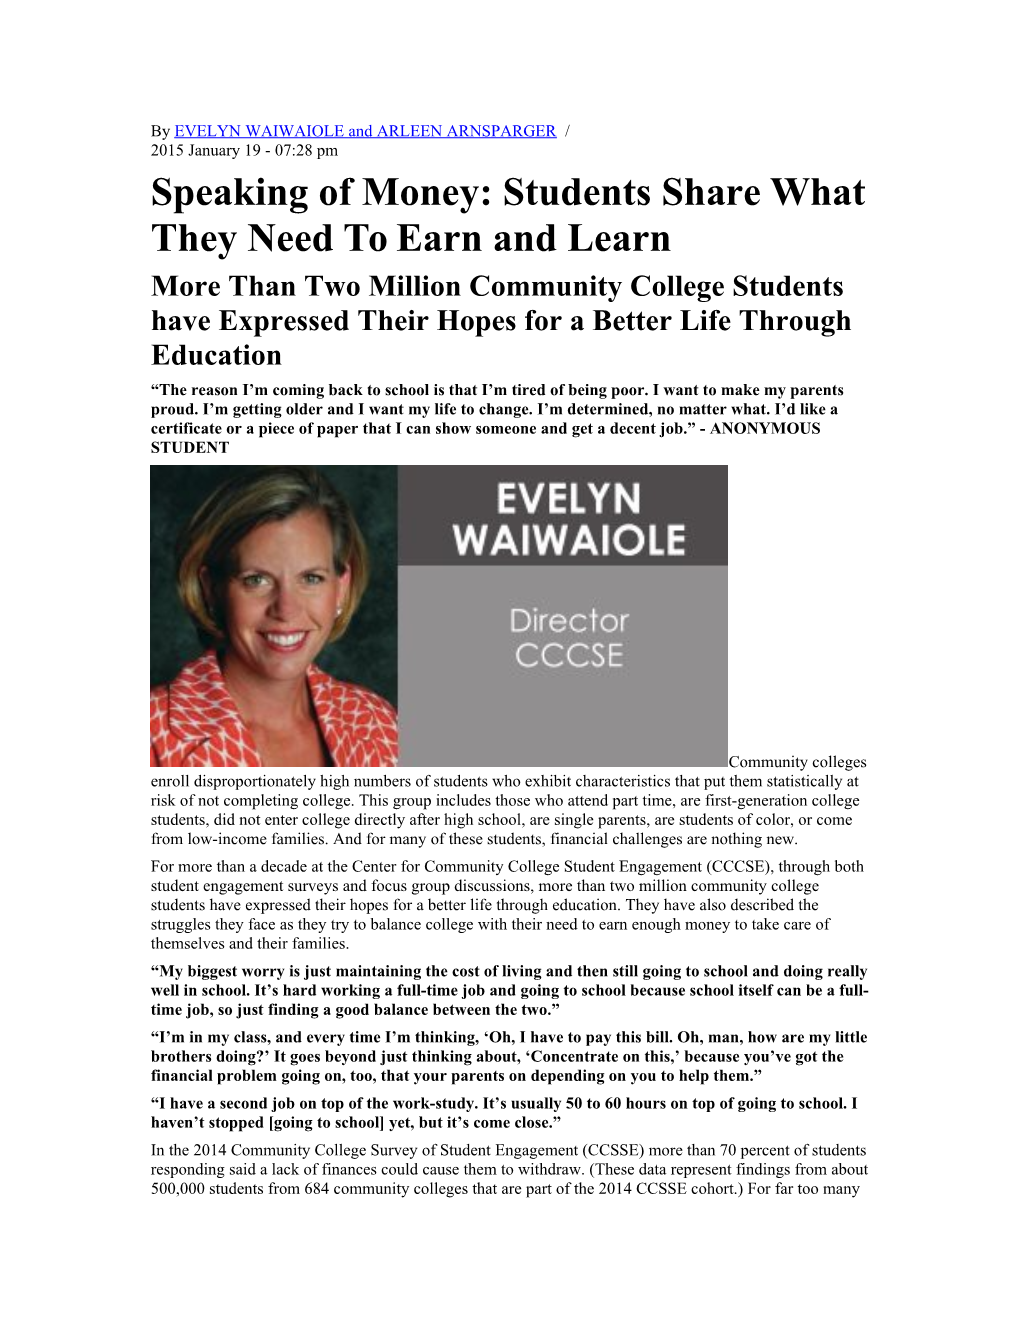 Speaking of Money: Students Share What They Need to Earn and Learn